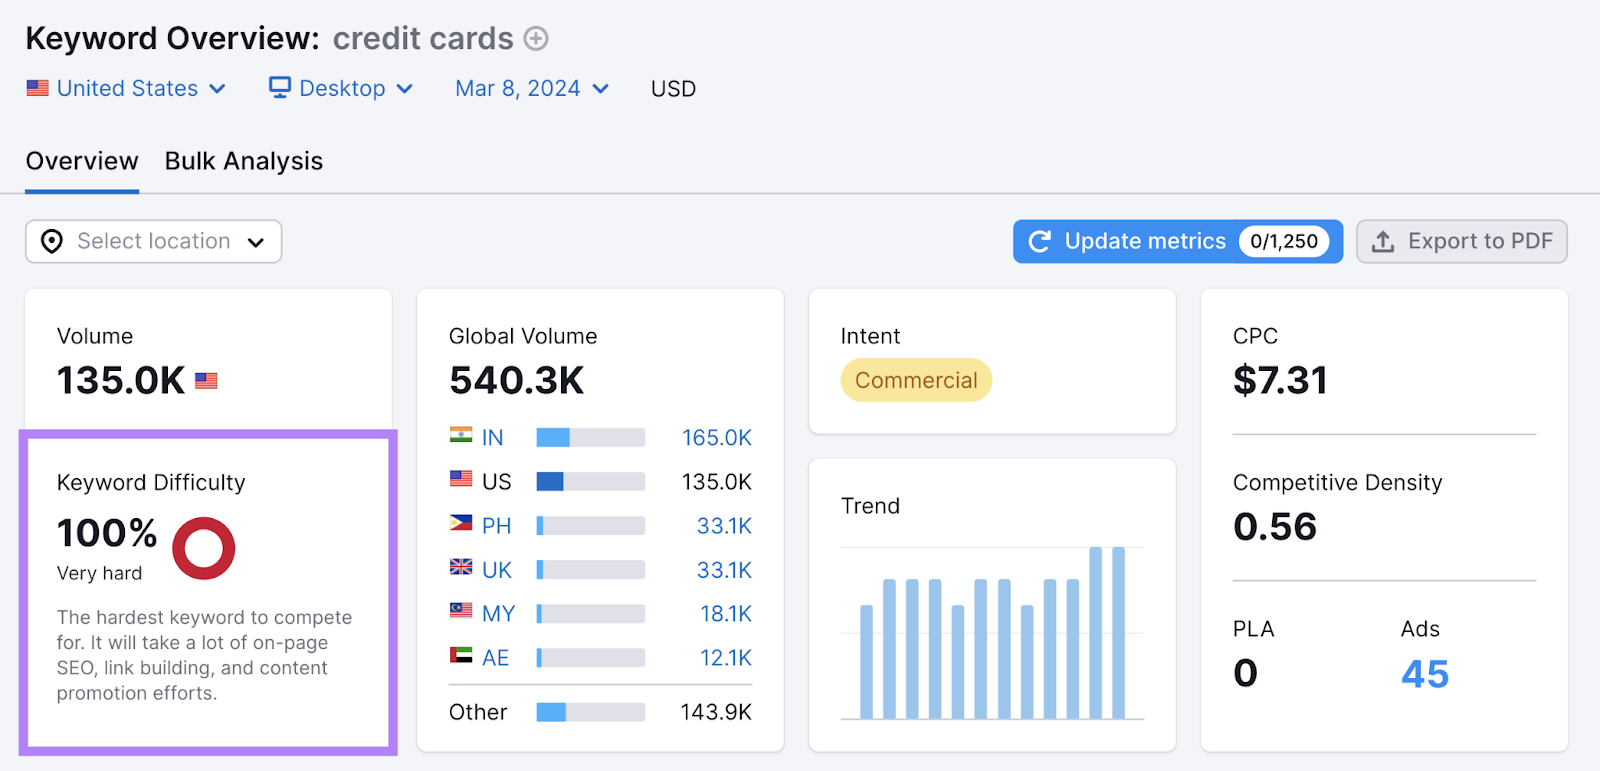 Keyword difficulty metric for "credit cards" shown in Keyword Overview